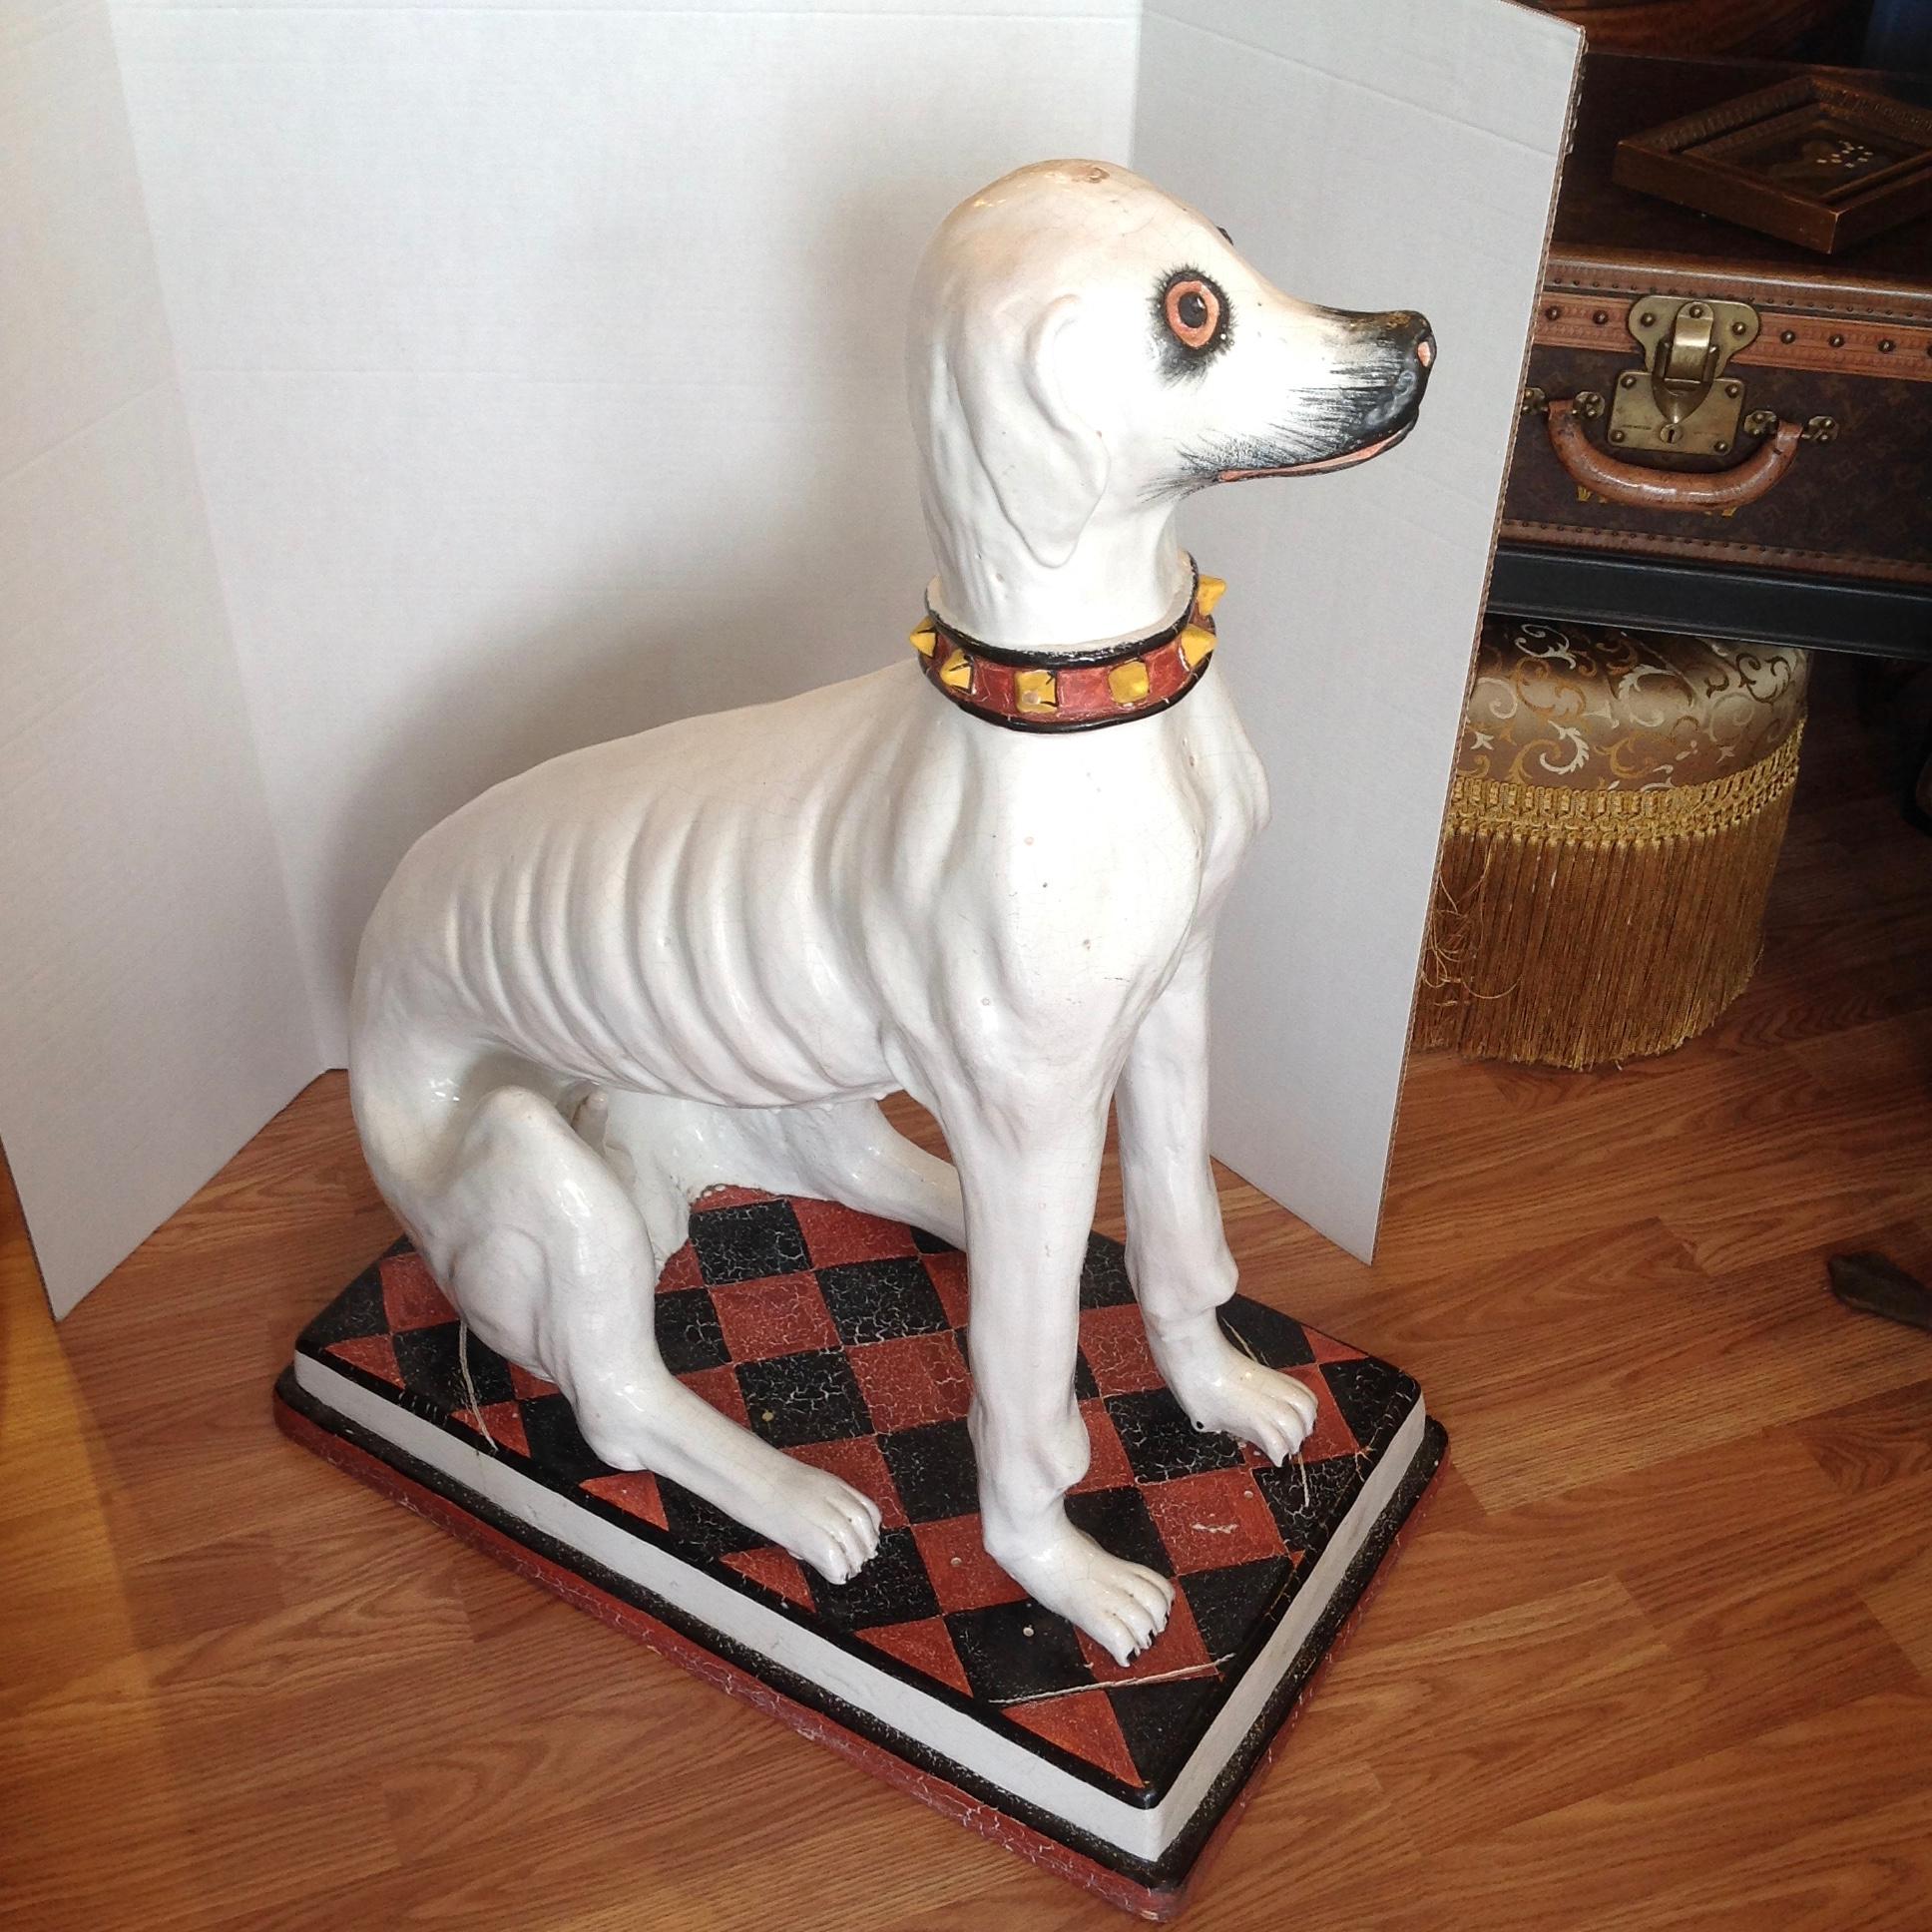 A substantial terra cotta rendering with a glazed finish.
The dog is sitting on a 